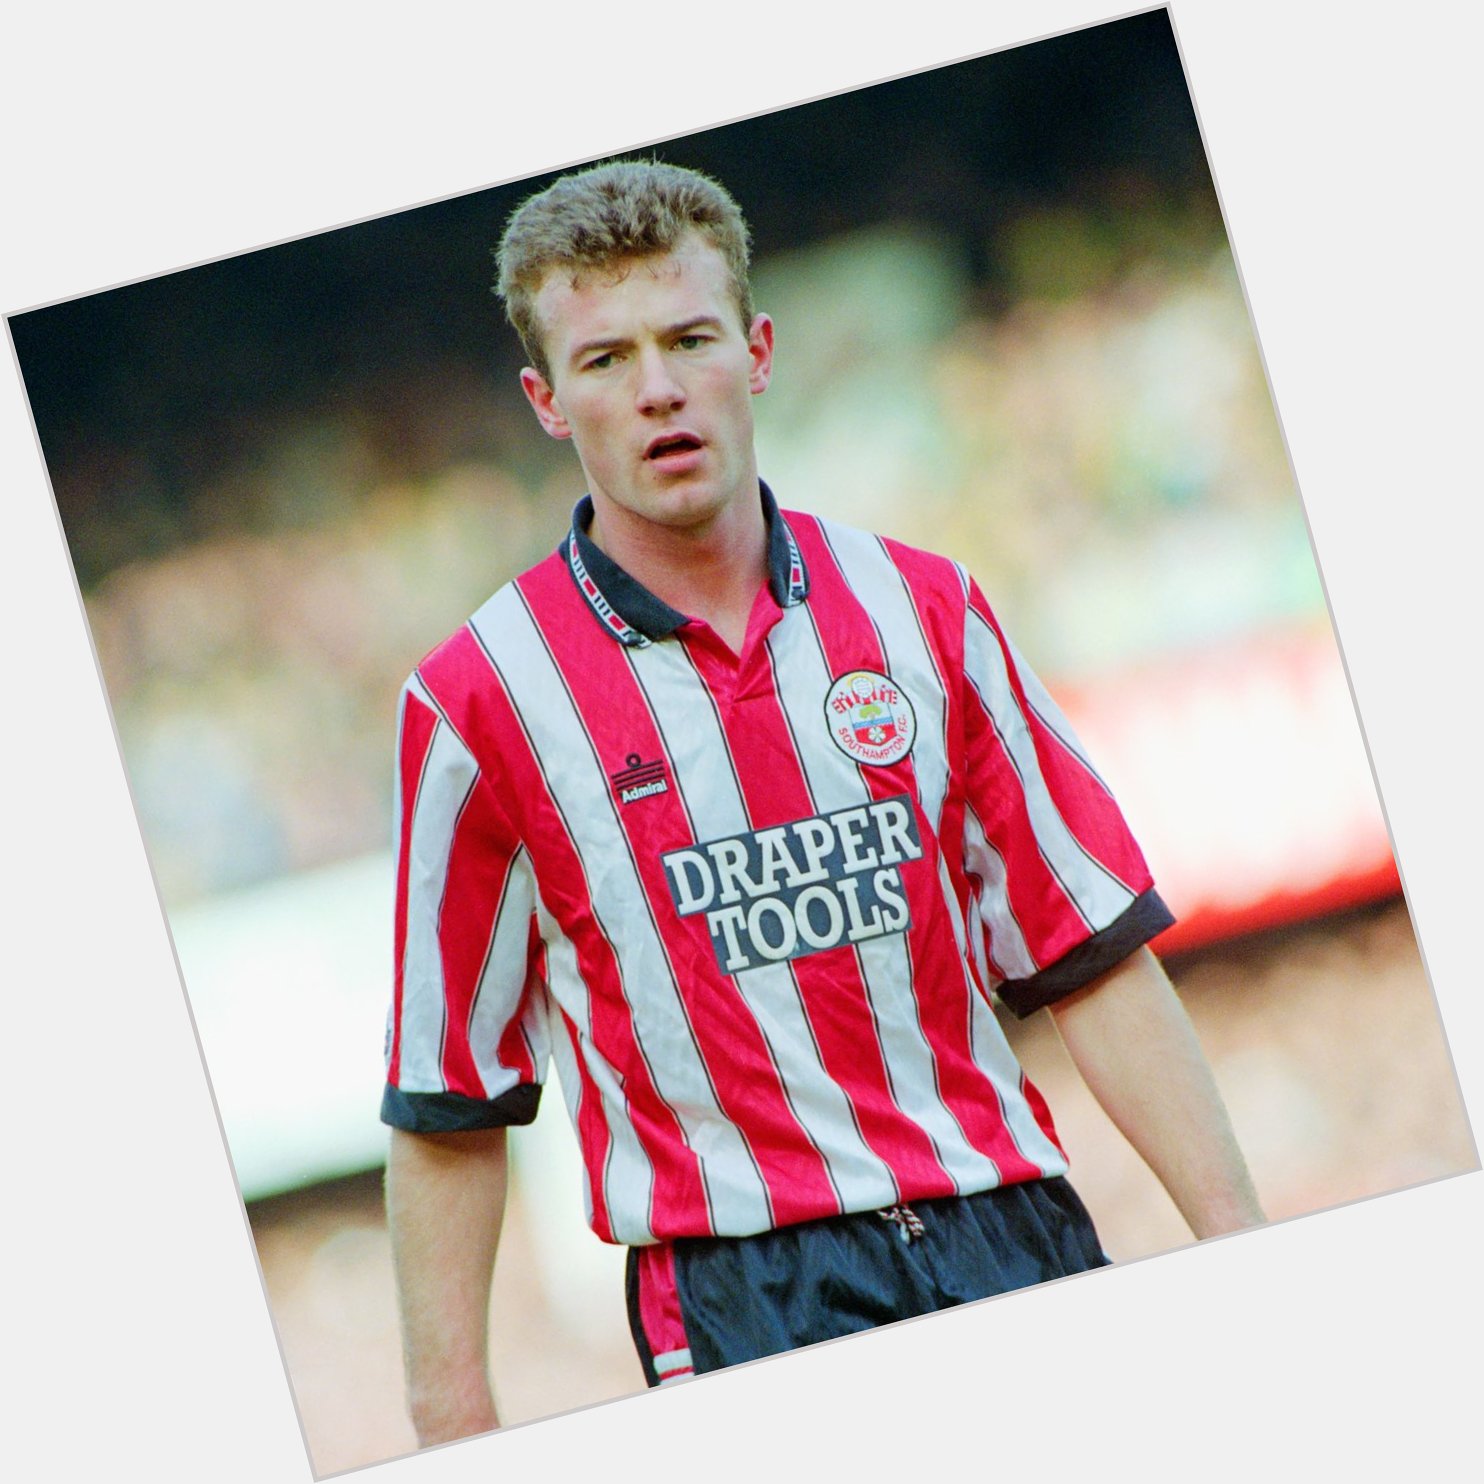  \"Alan Shearer... Remember the name!\"

We certainly did!

Happy birthday from all of us at  